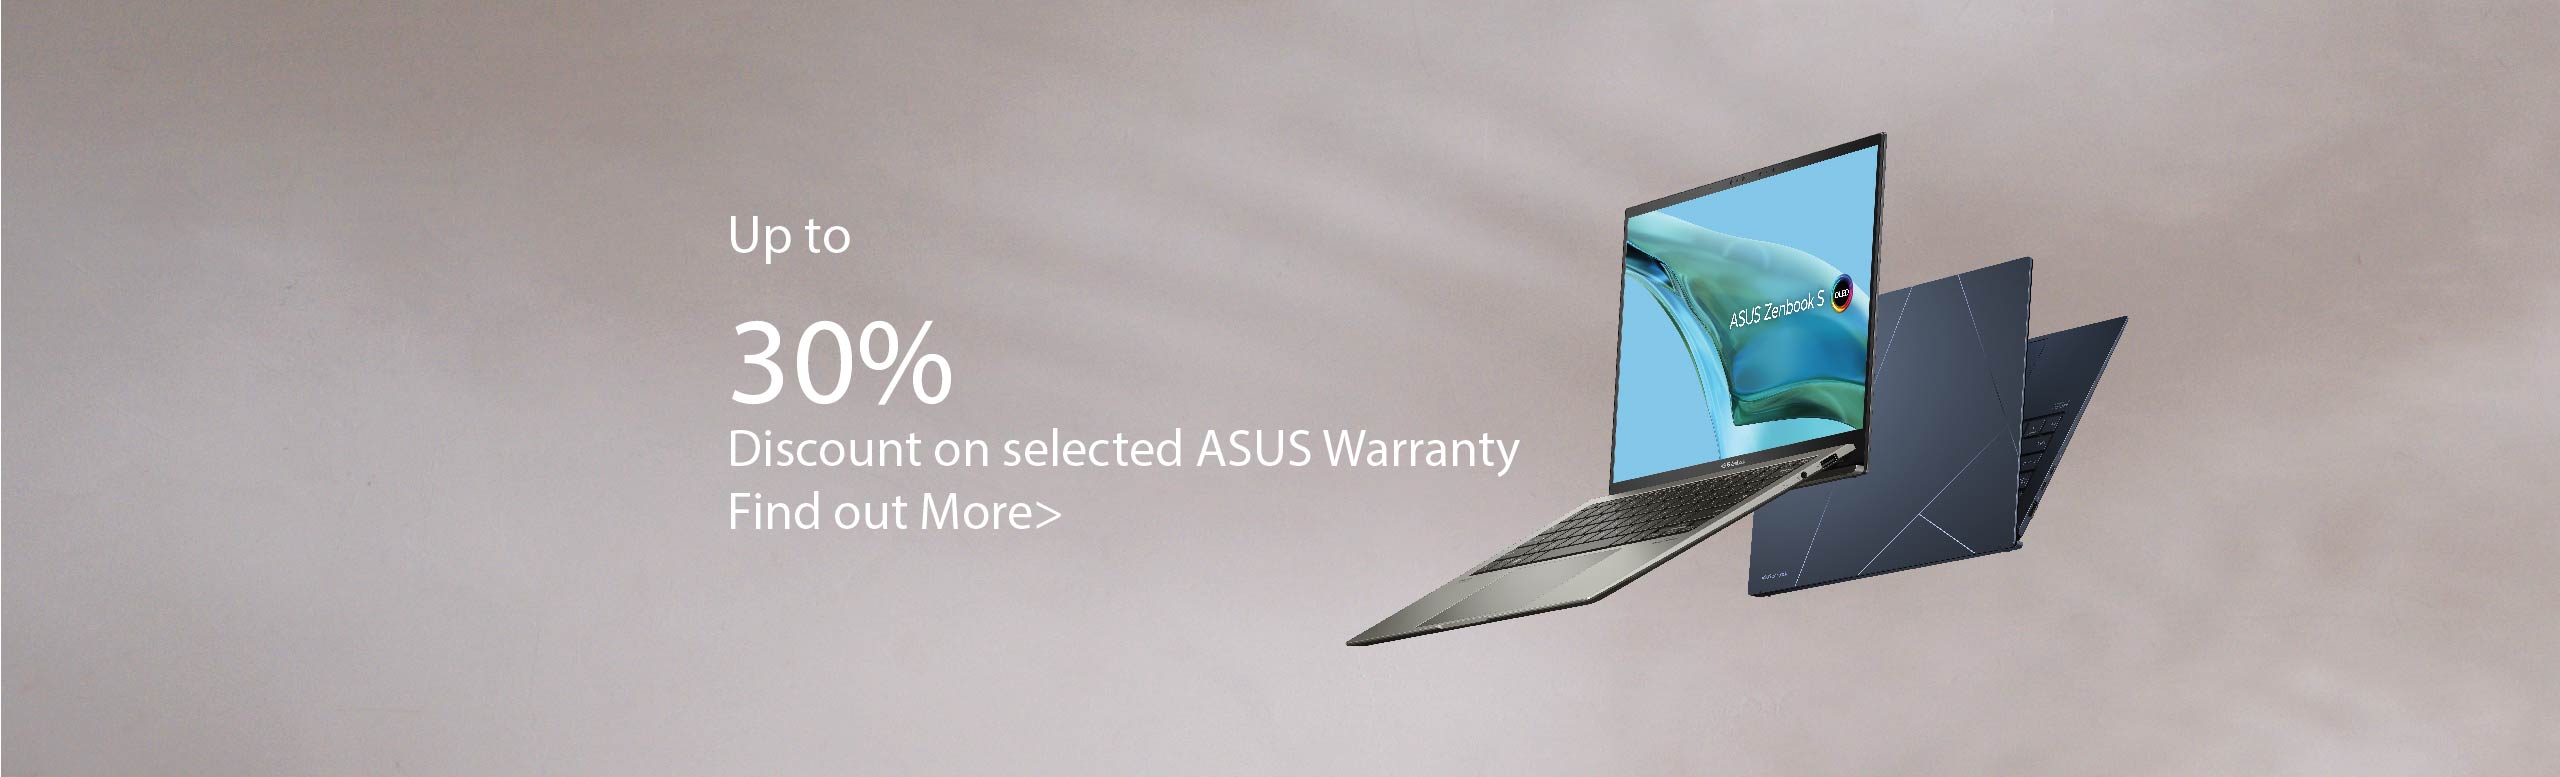 ASUS Warranty Promotions